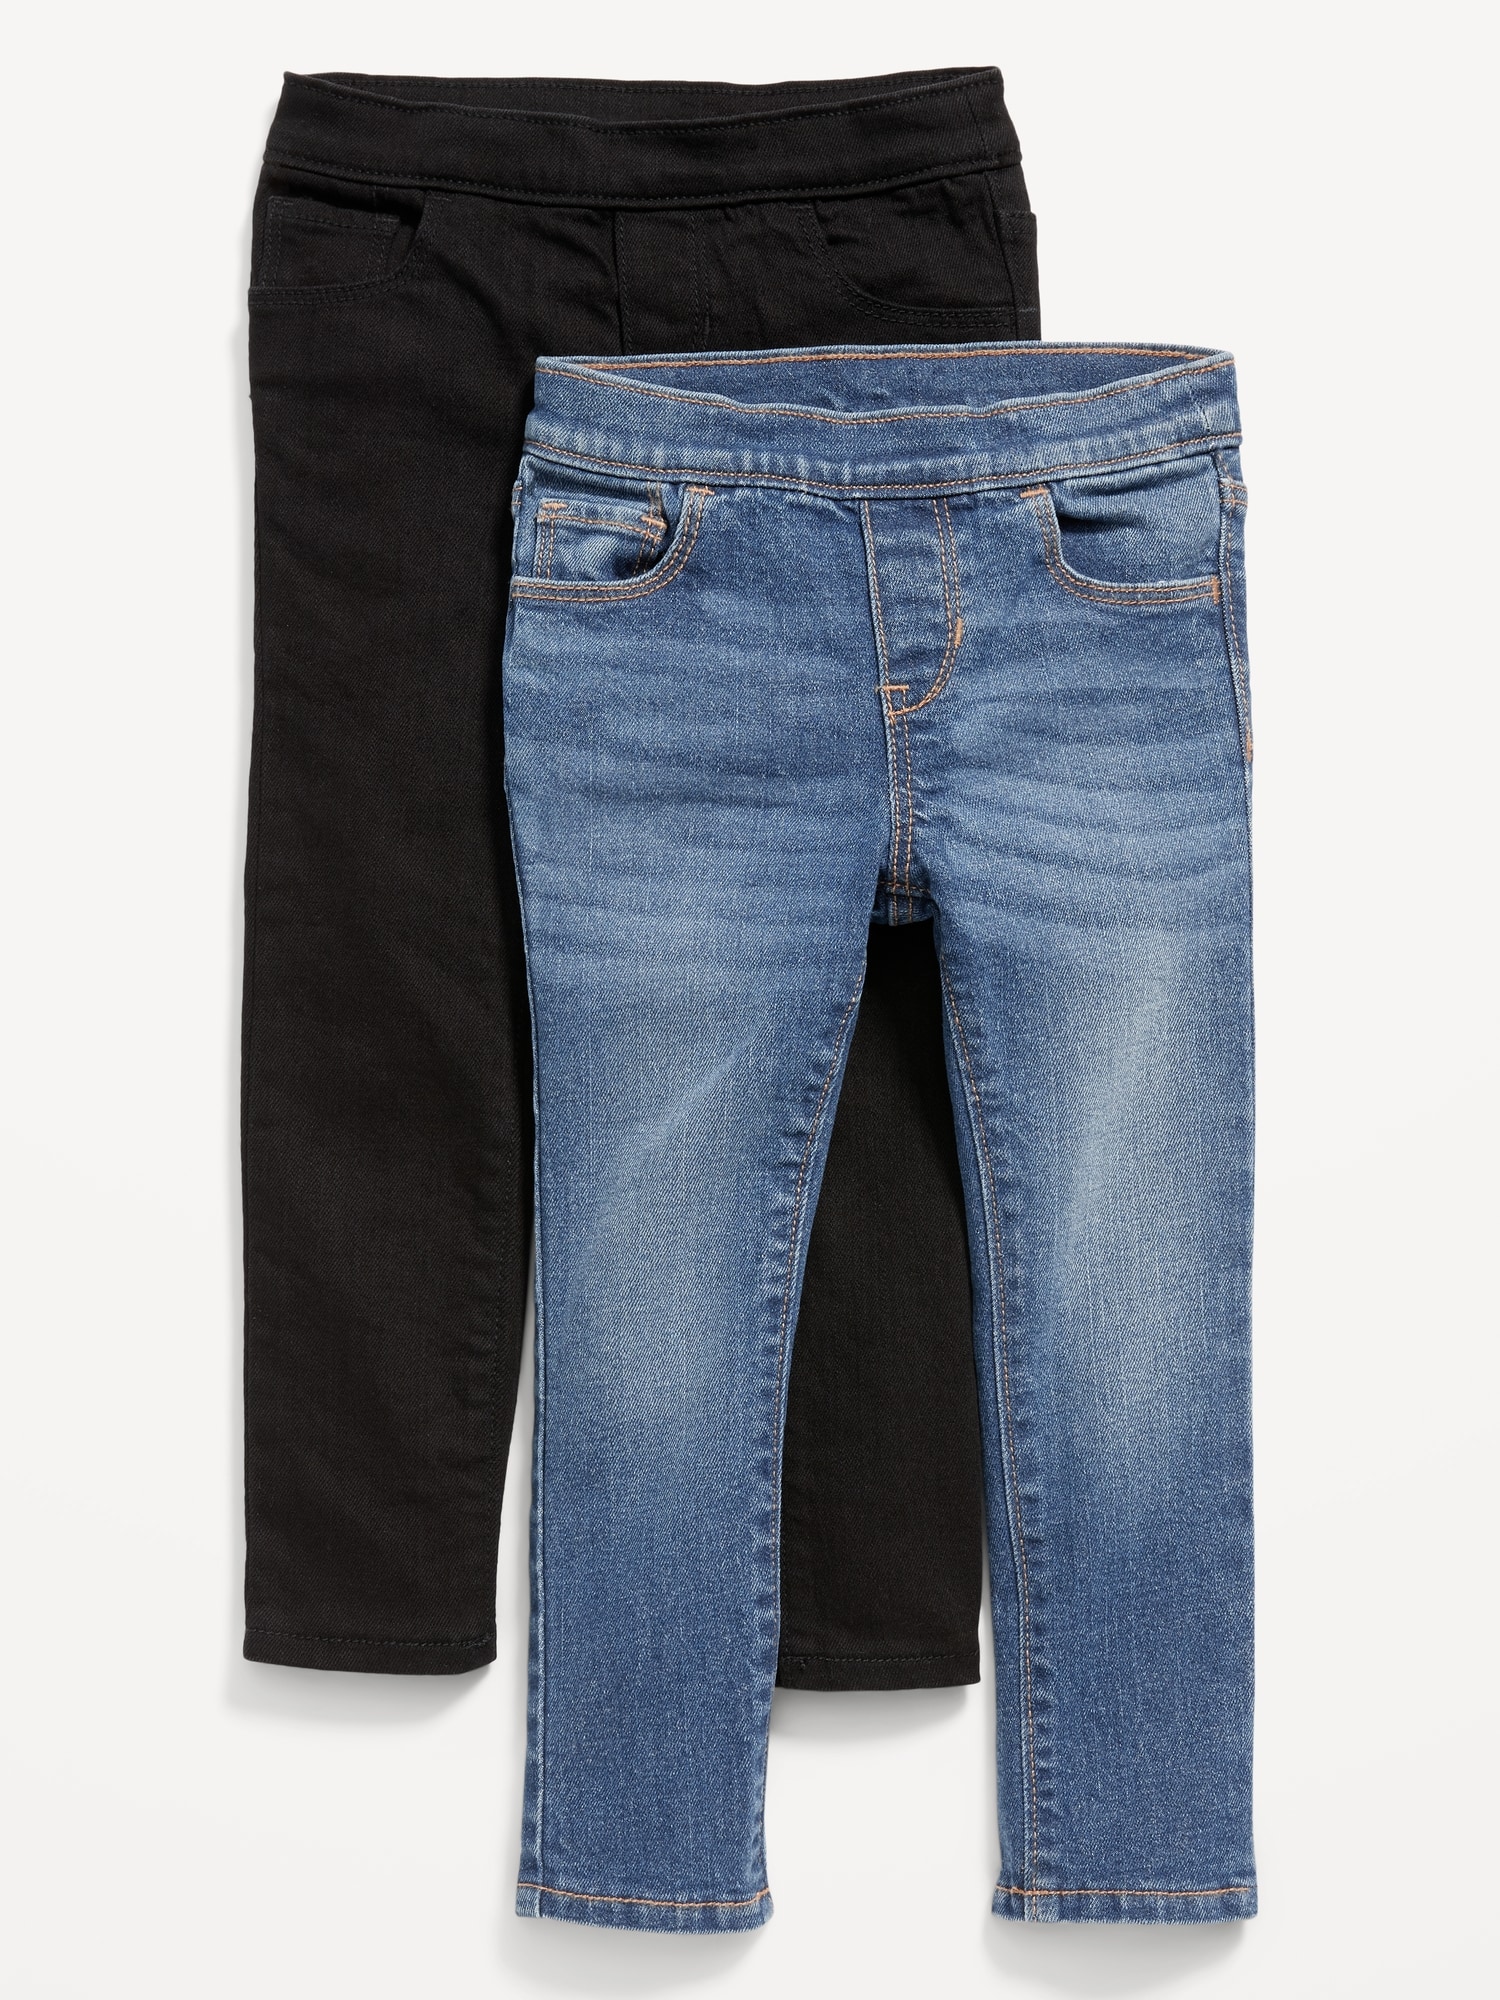 Jeans & Trousers, COMBO OF 2 DENIM JEANS AND JEGGINGS